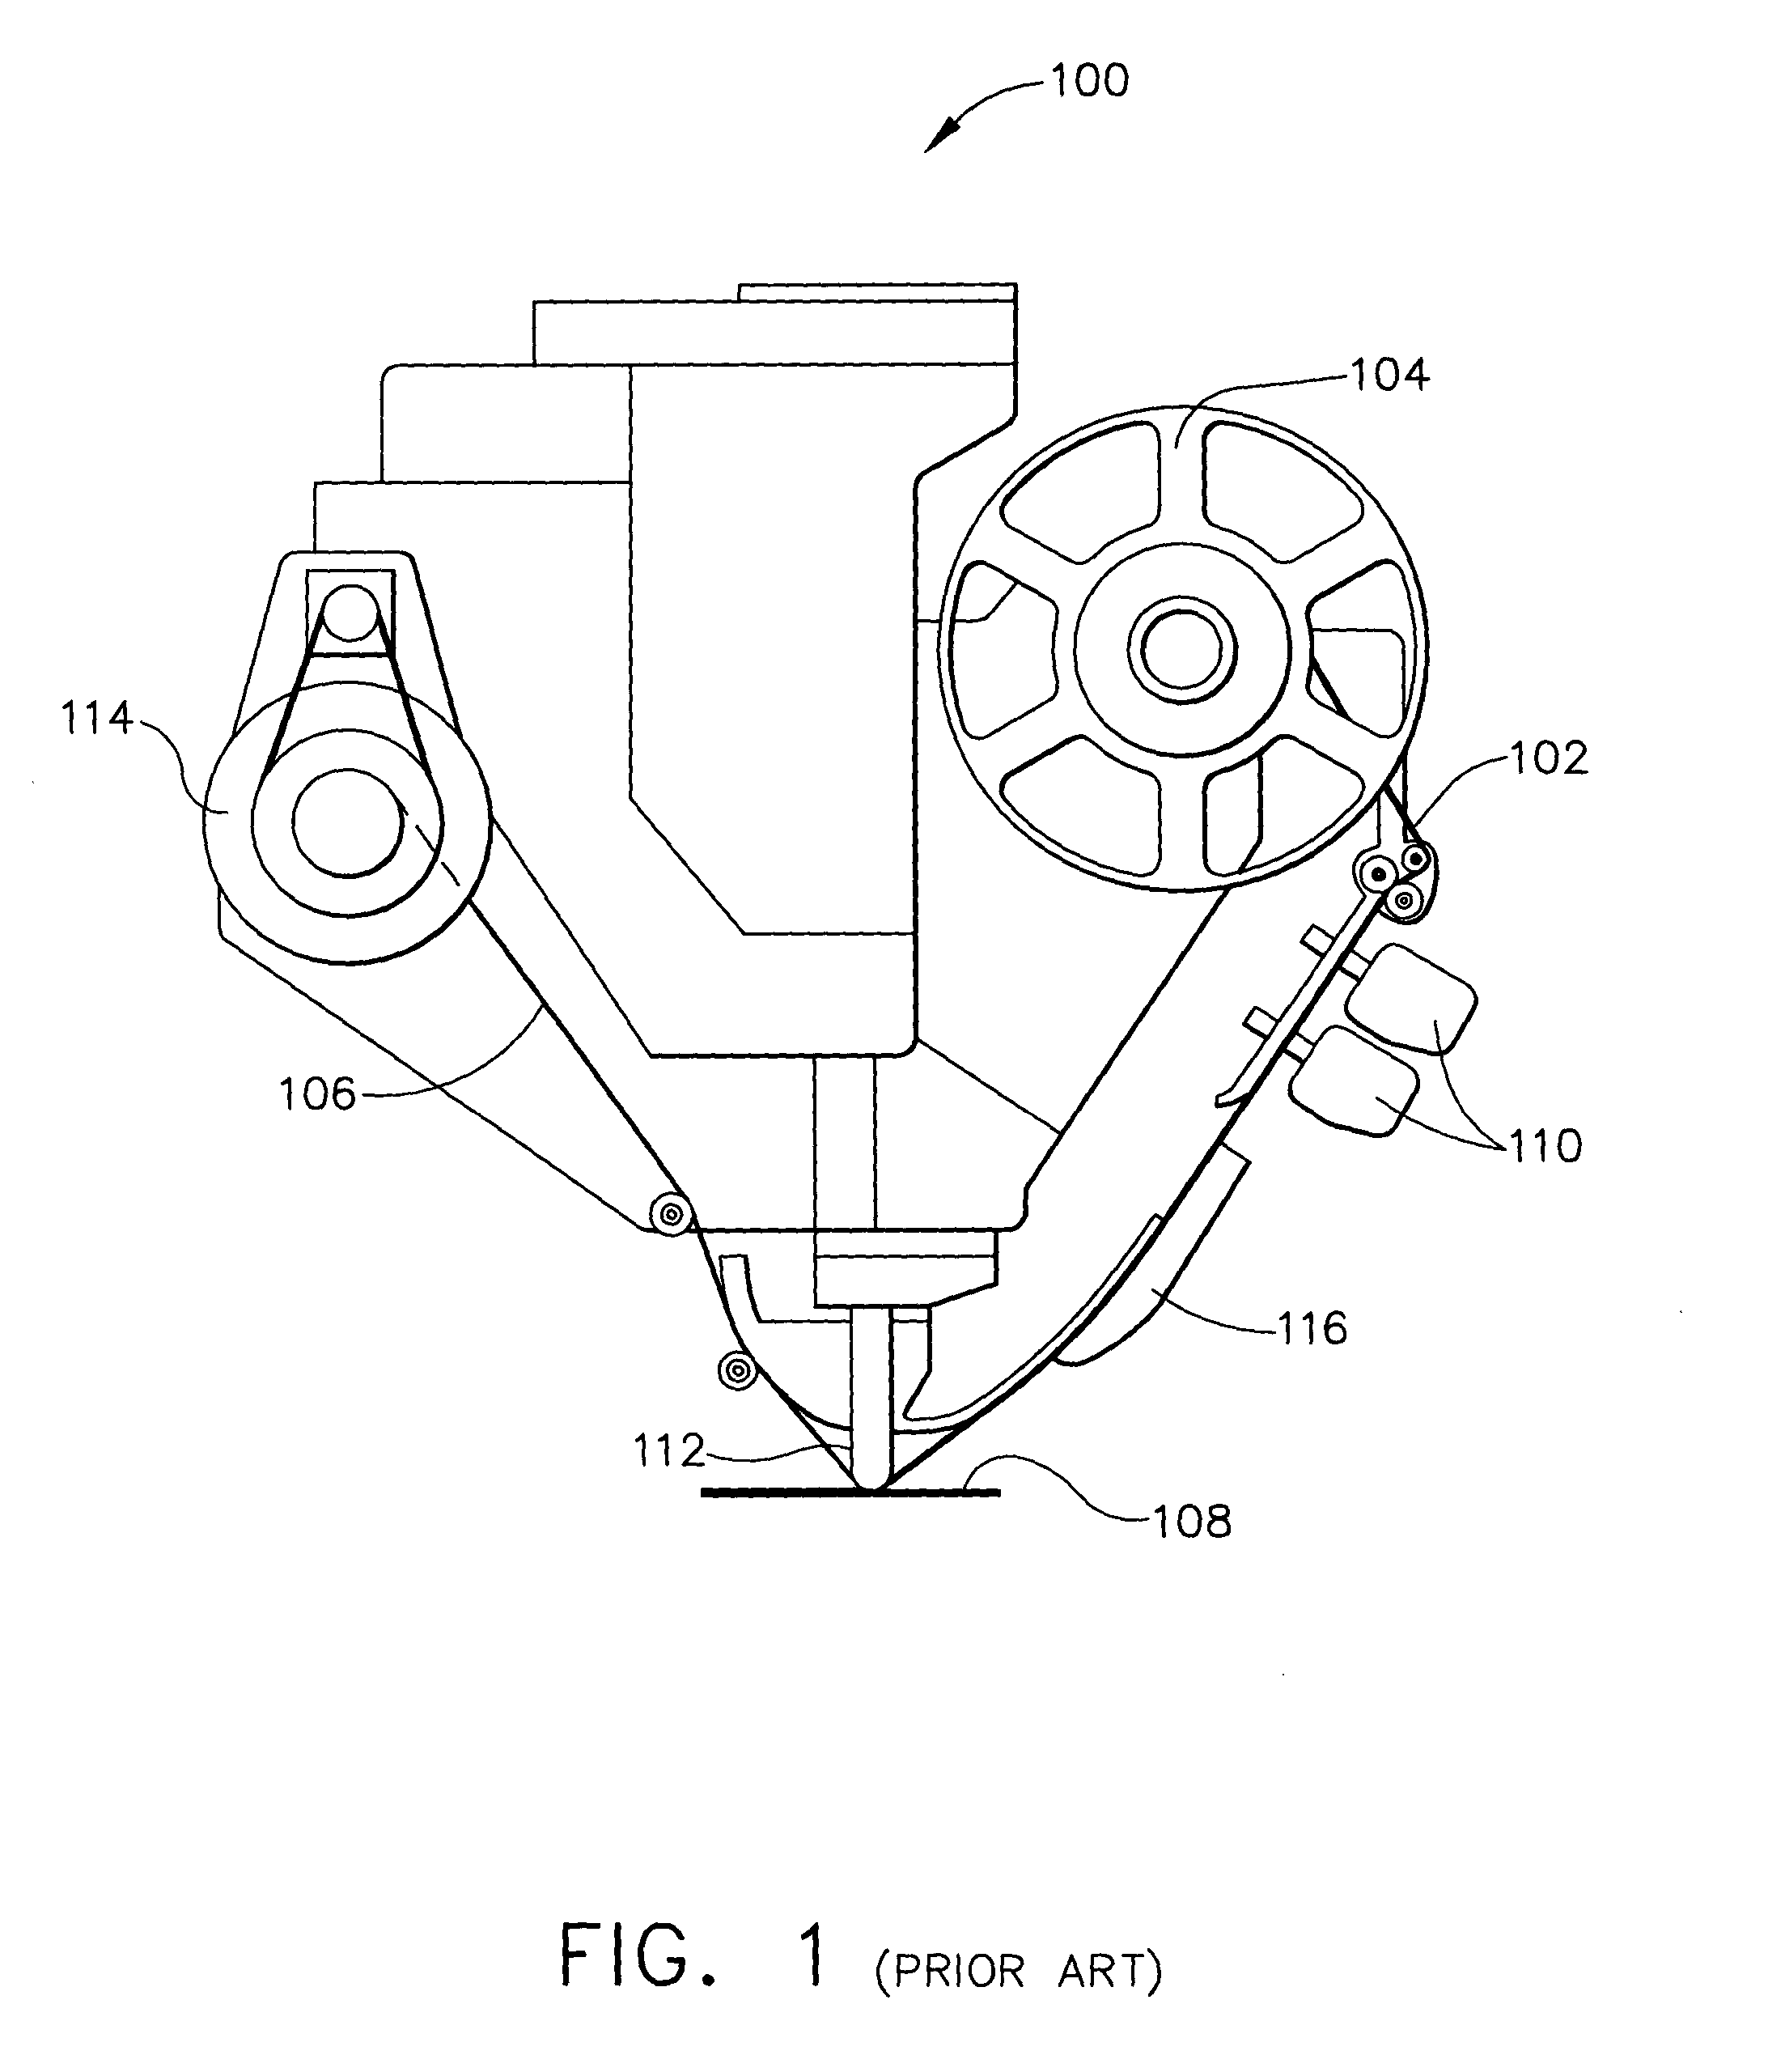 Automated composite lay-up to an internal fuselage mandrel